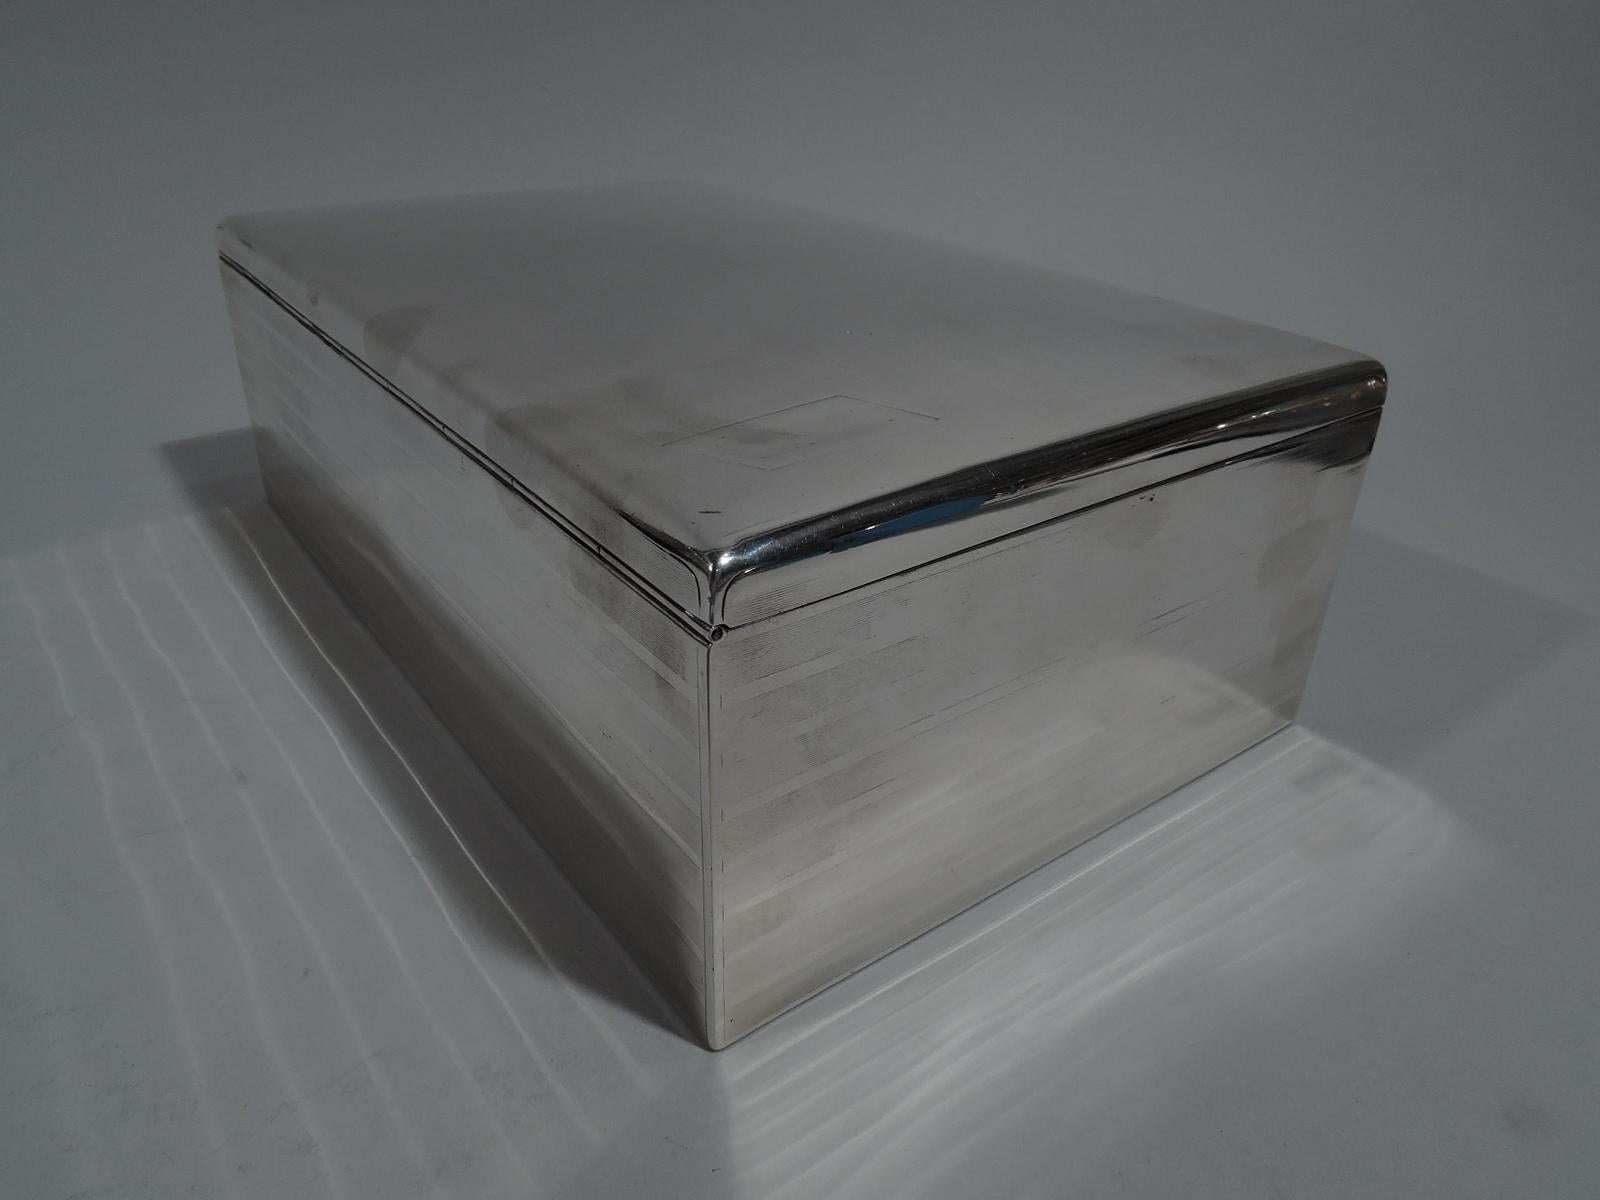 Distinguished Edwardian sterling silver cigar box. Made by Gorham in Providence, ca 1910. Rectangular with straight sides. Cover hinged and gently curved with tab. Wraparound alternating engine-turned lines and plain stripes. Cover same with vacant